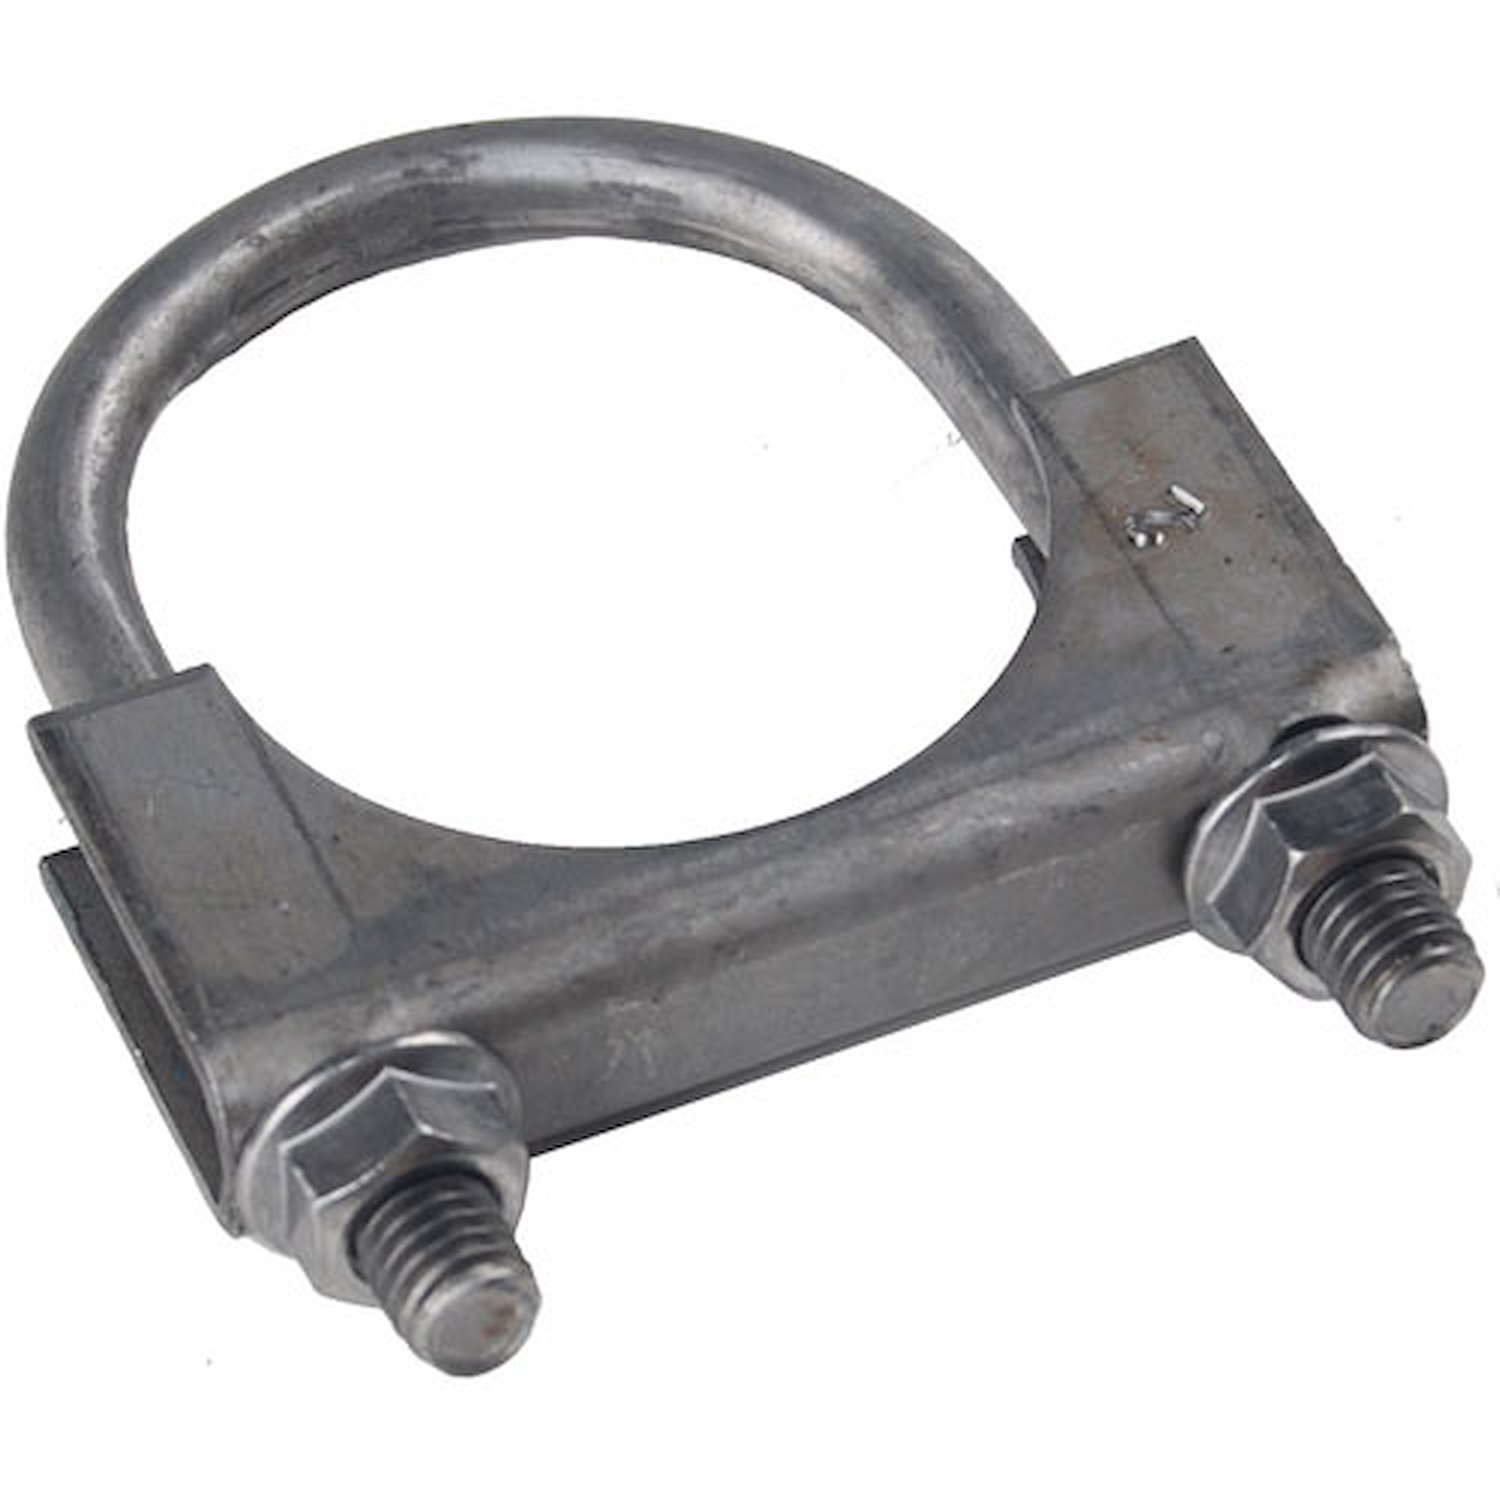 Steel U-Clamp for 1-1/4" OD Pipe